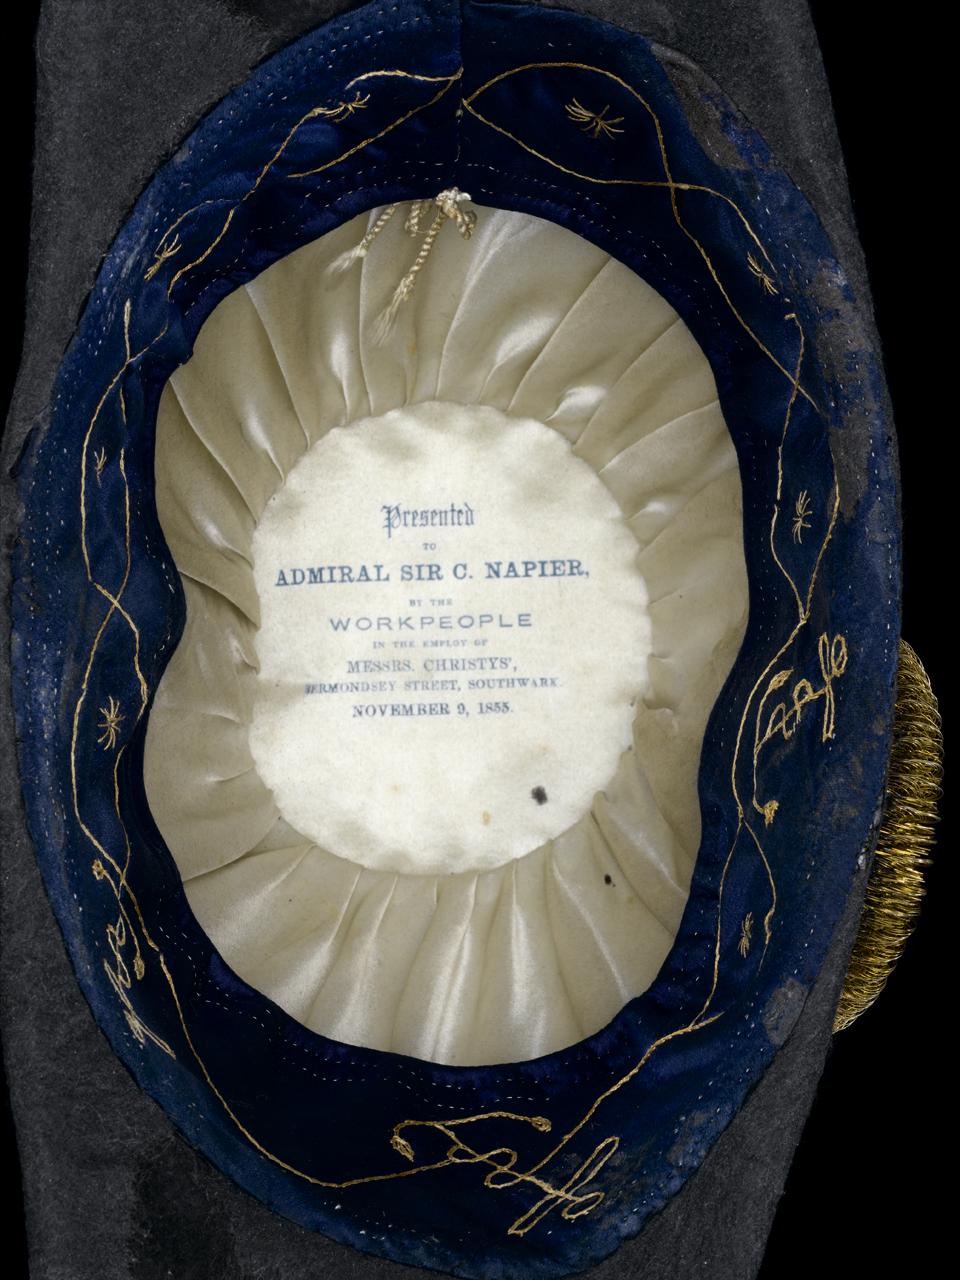 The inside of a cocked hat belong to Admiral Charles Napier, with an inscription